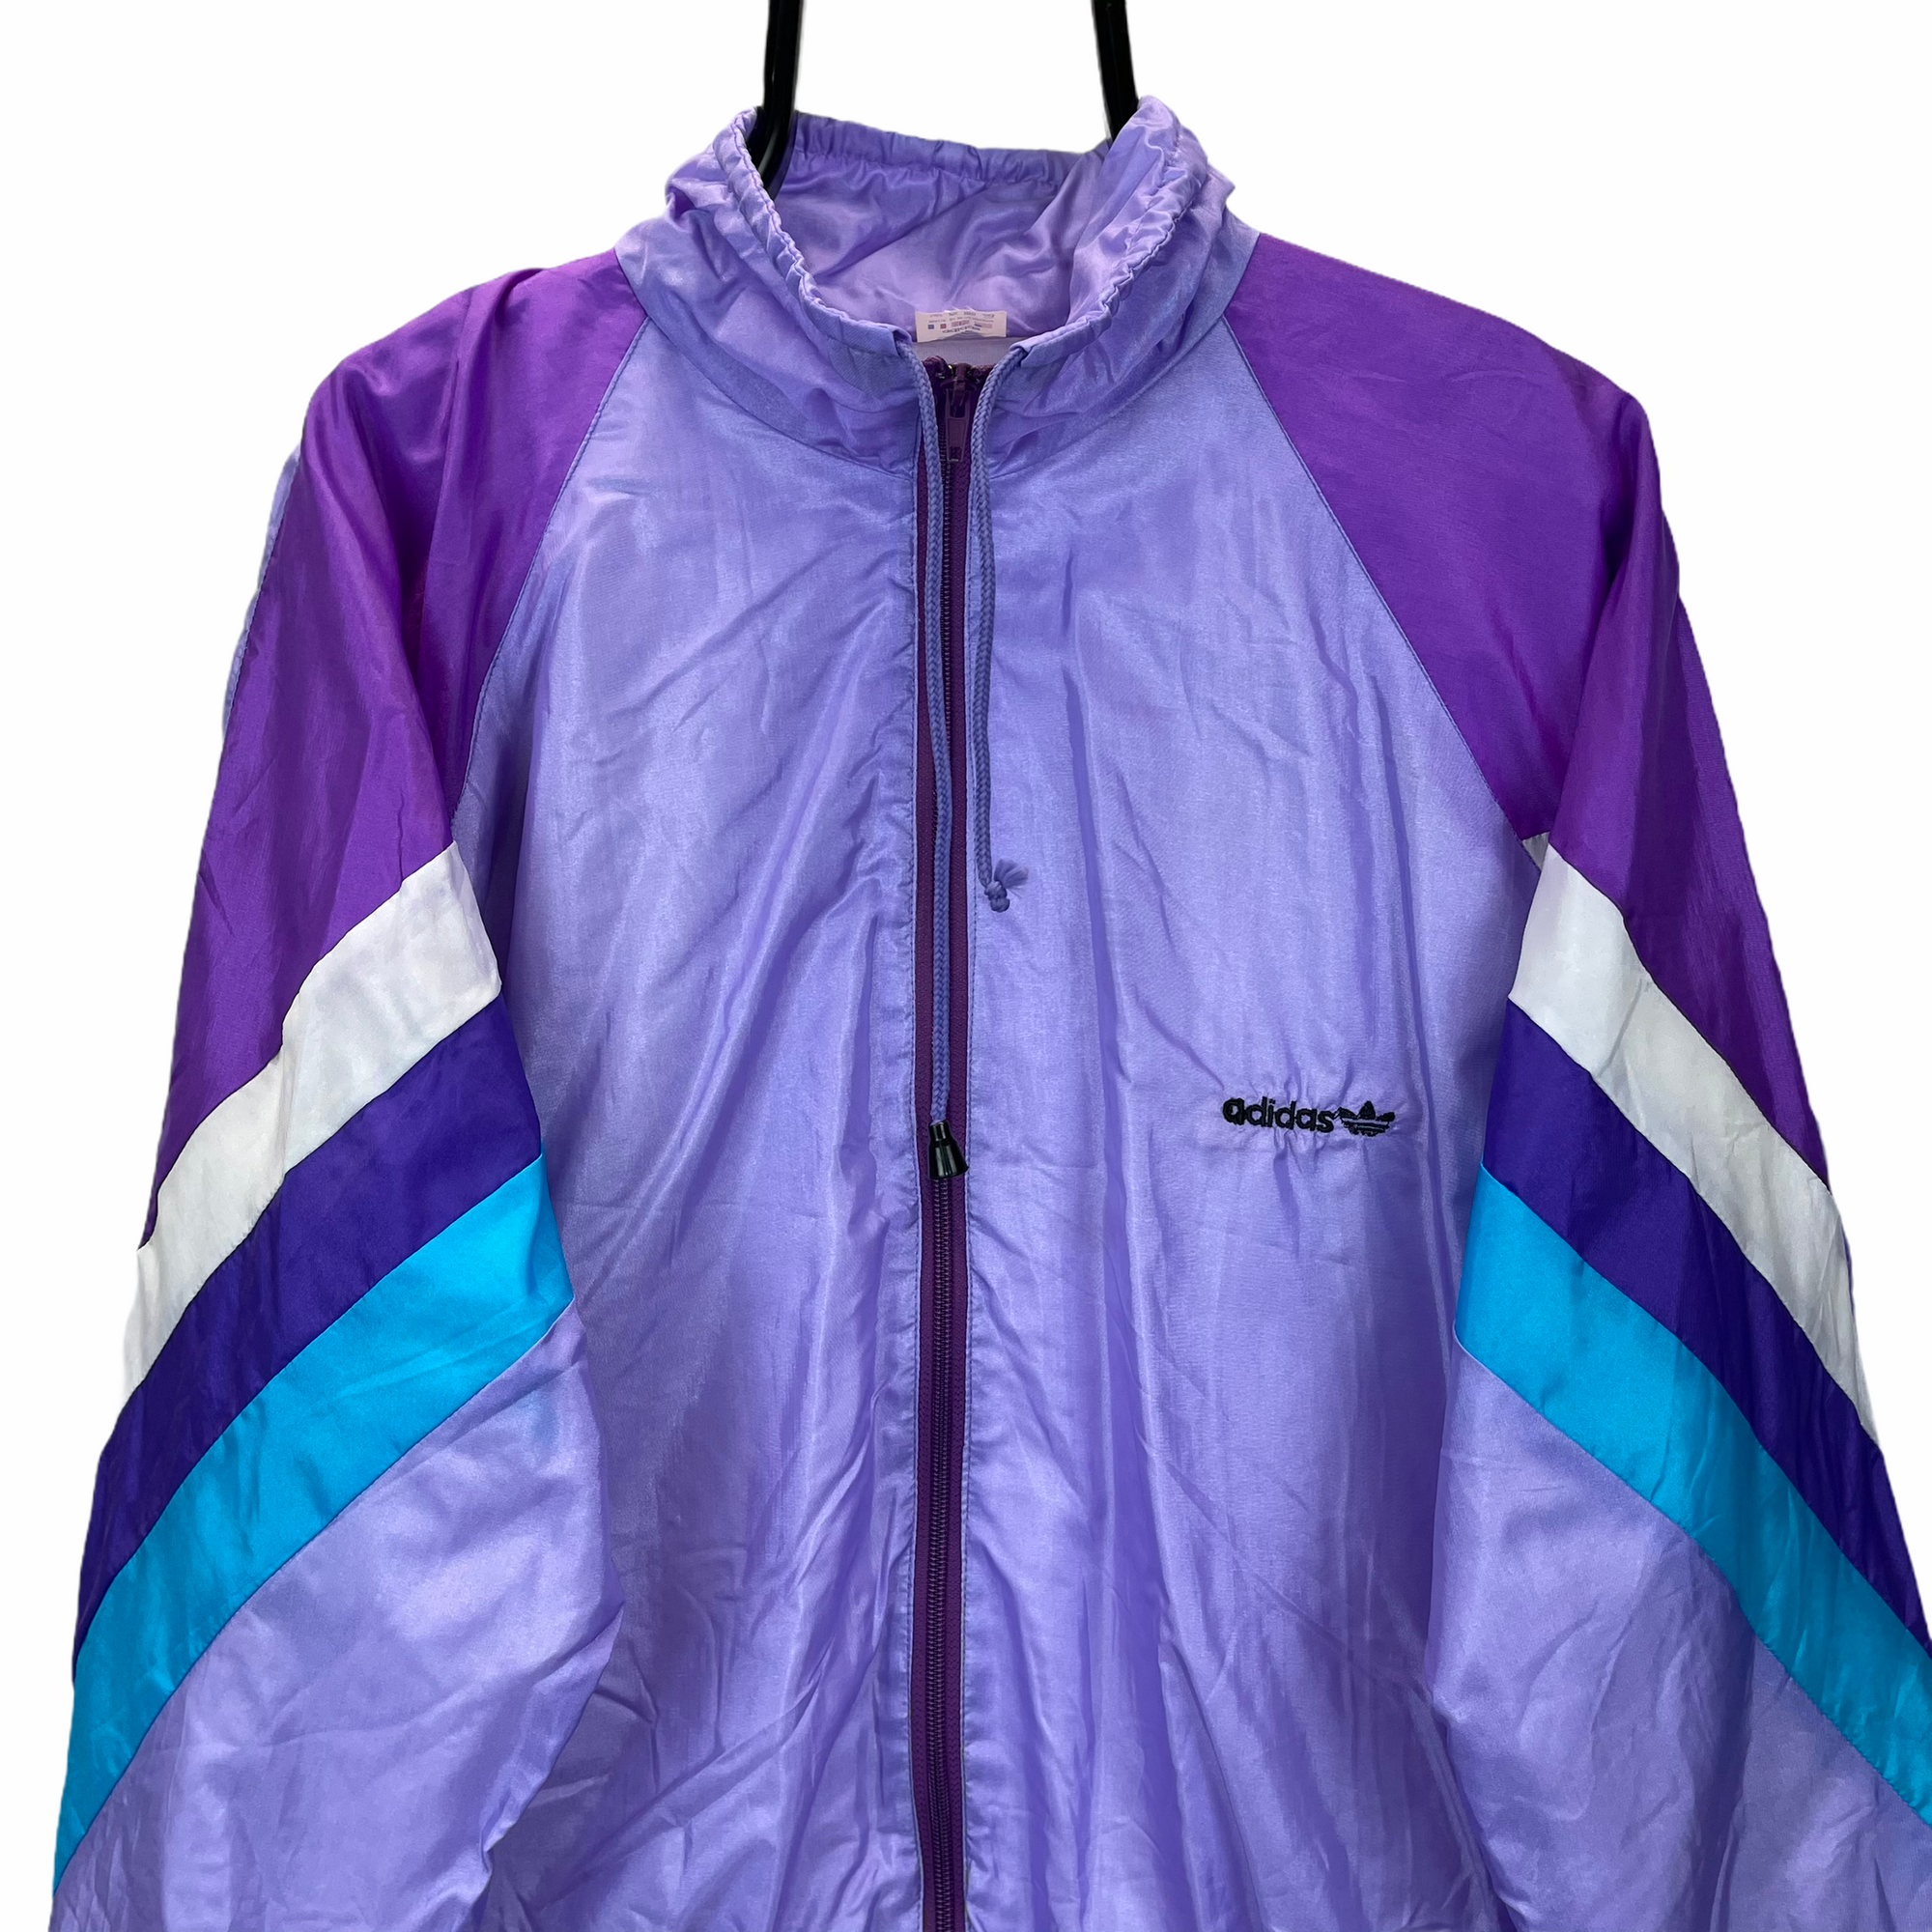 VINTAGE 80S ADIDAS TRACK JACKET IN PINK, PURPLE, WHITE & TURQUOISE - MEN'S LARGE/WOMEN'S XL